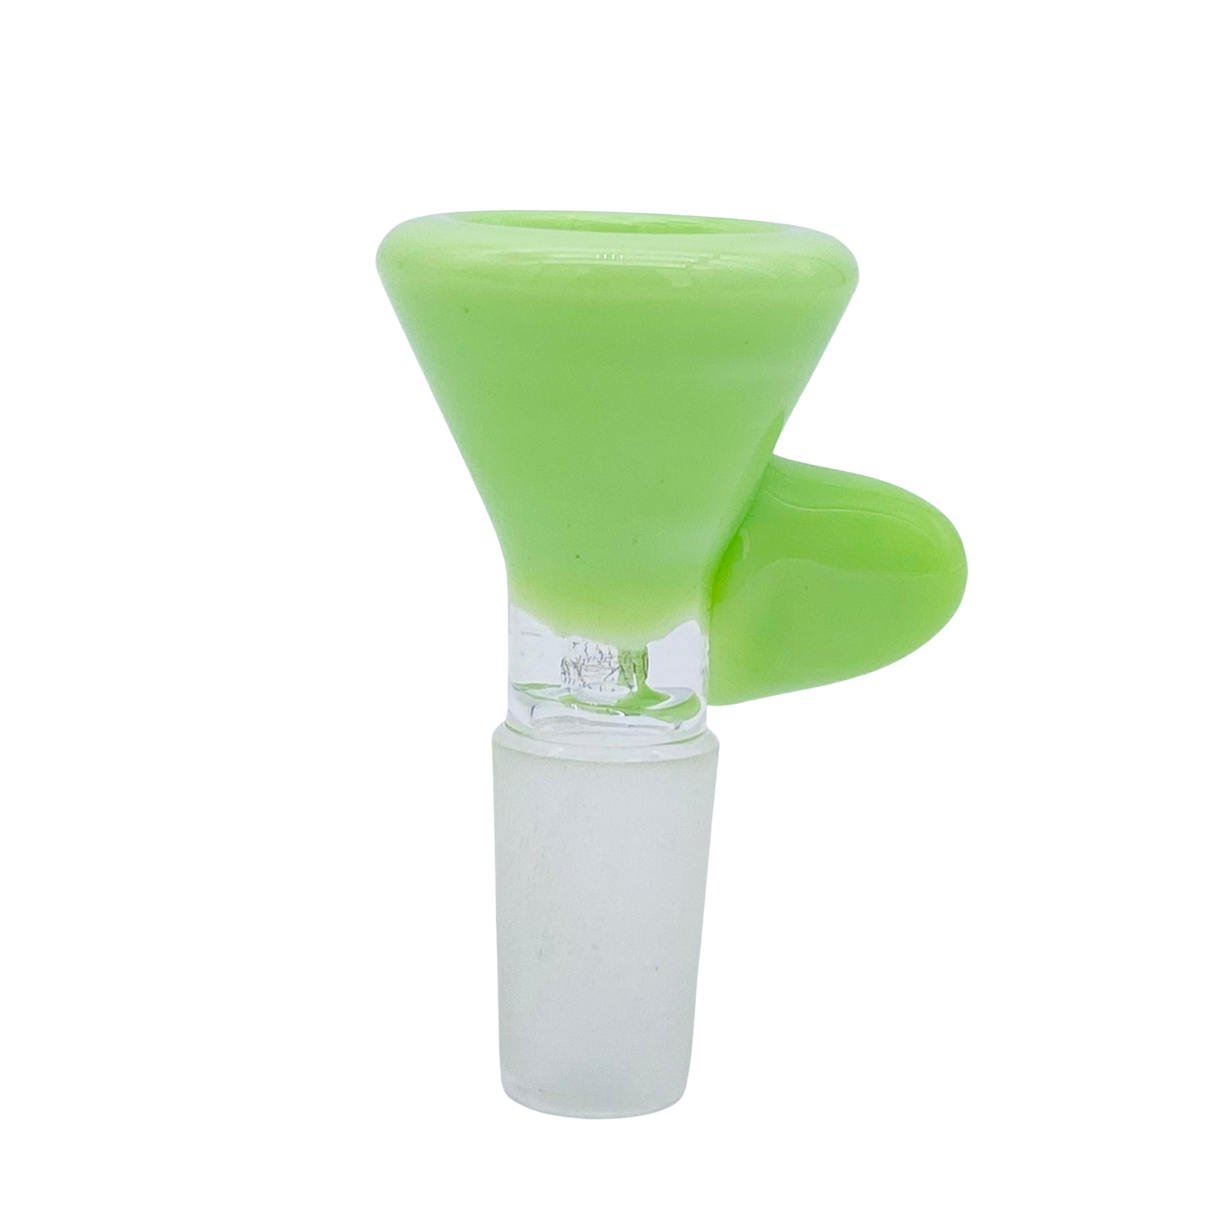 MAV Glass Thick Handle Bowl in Lime Green 14mm, Front View on Seamless White Background